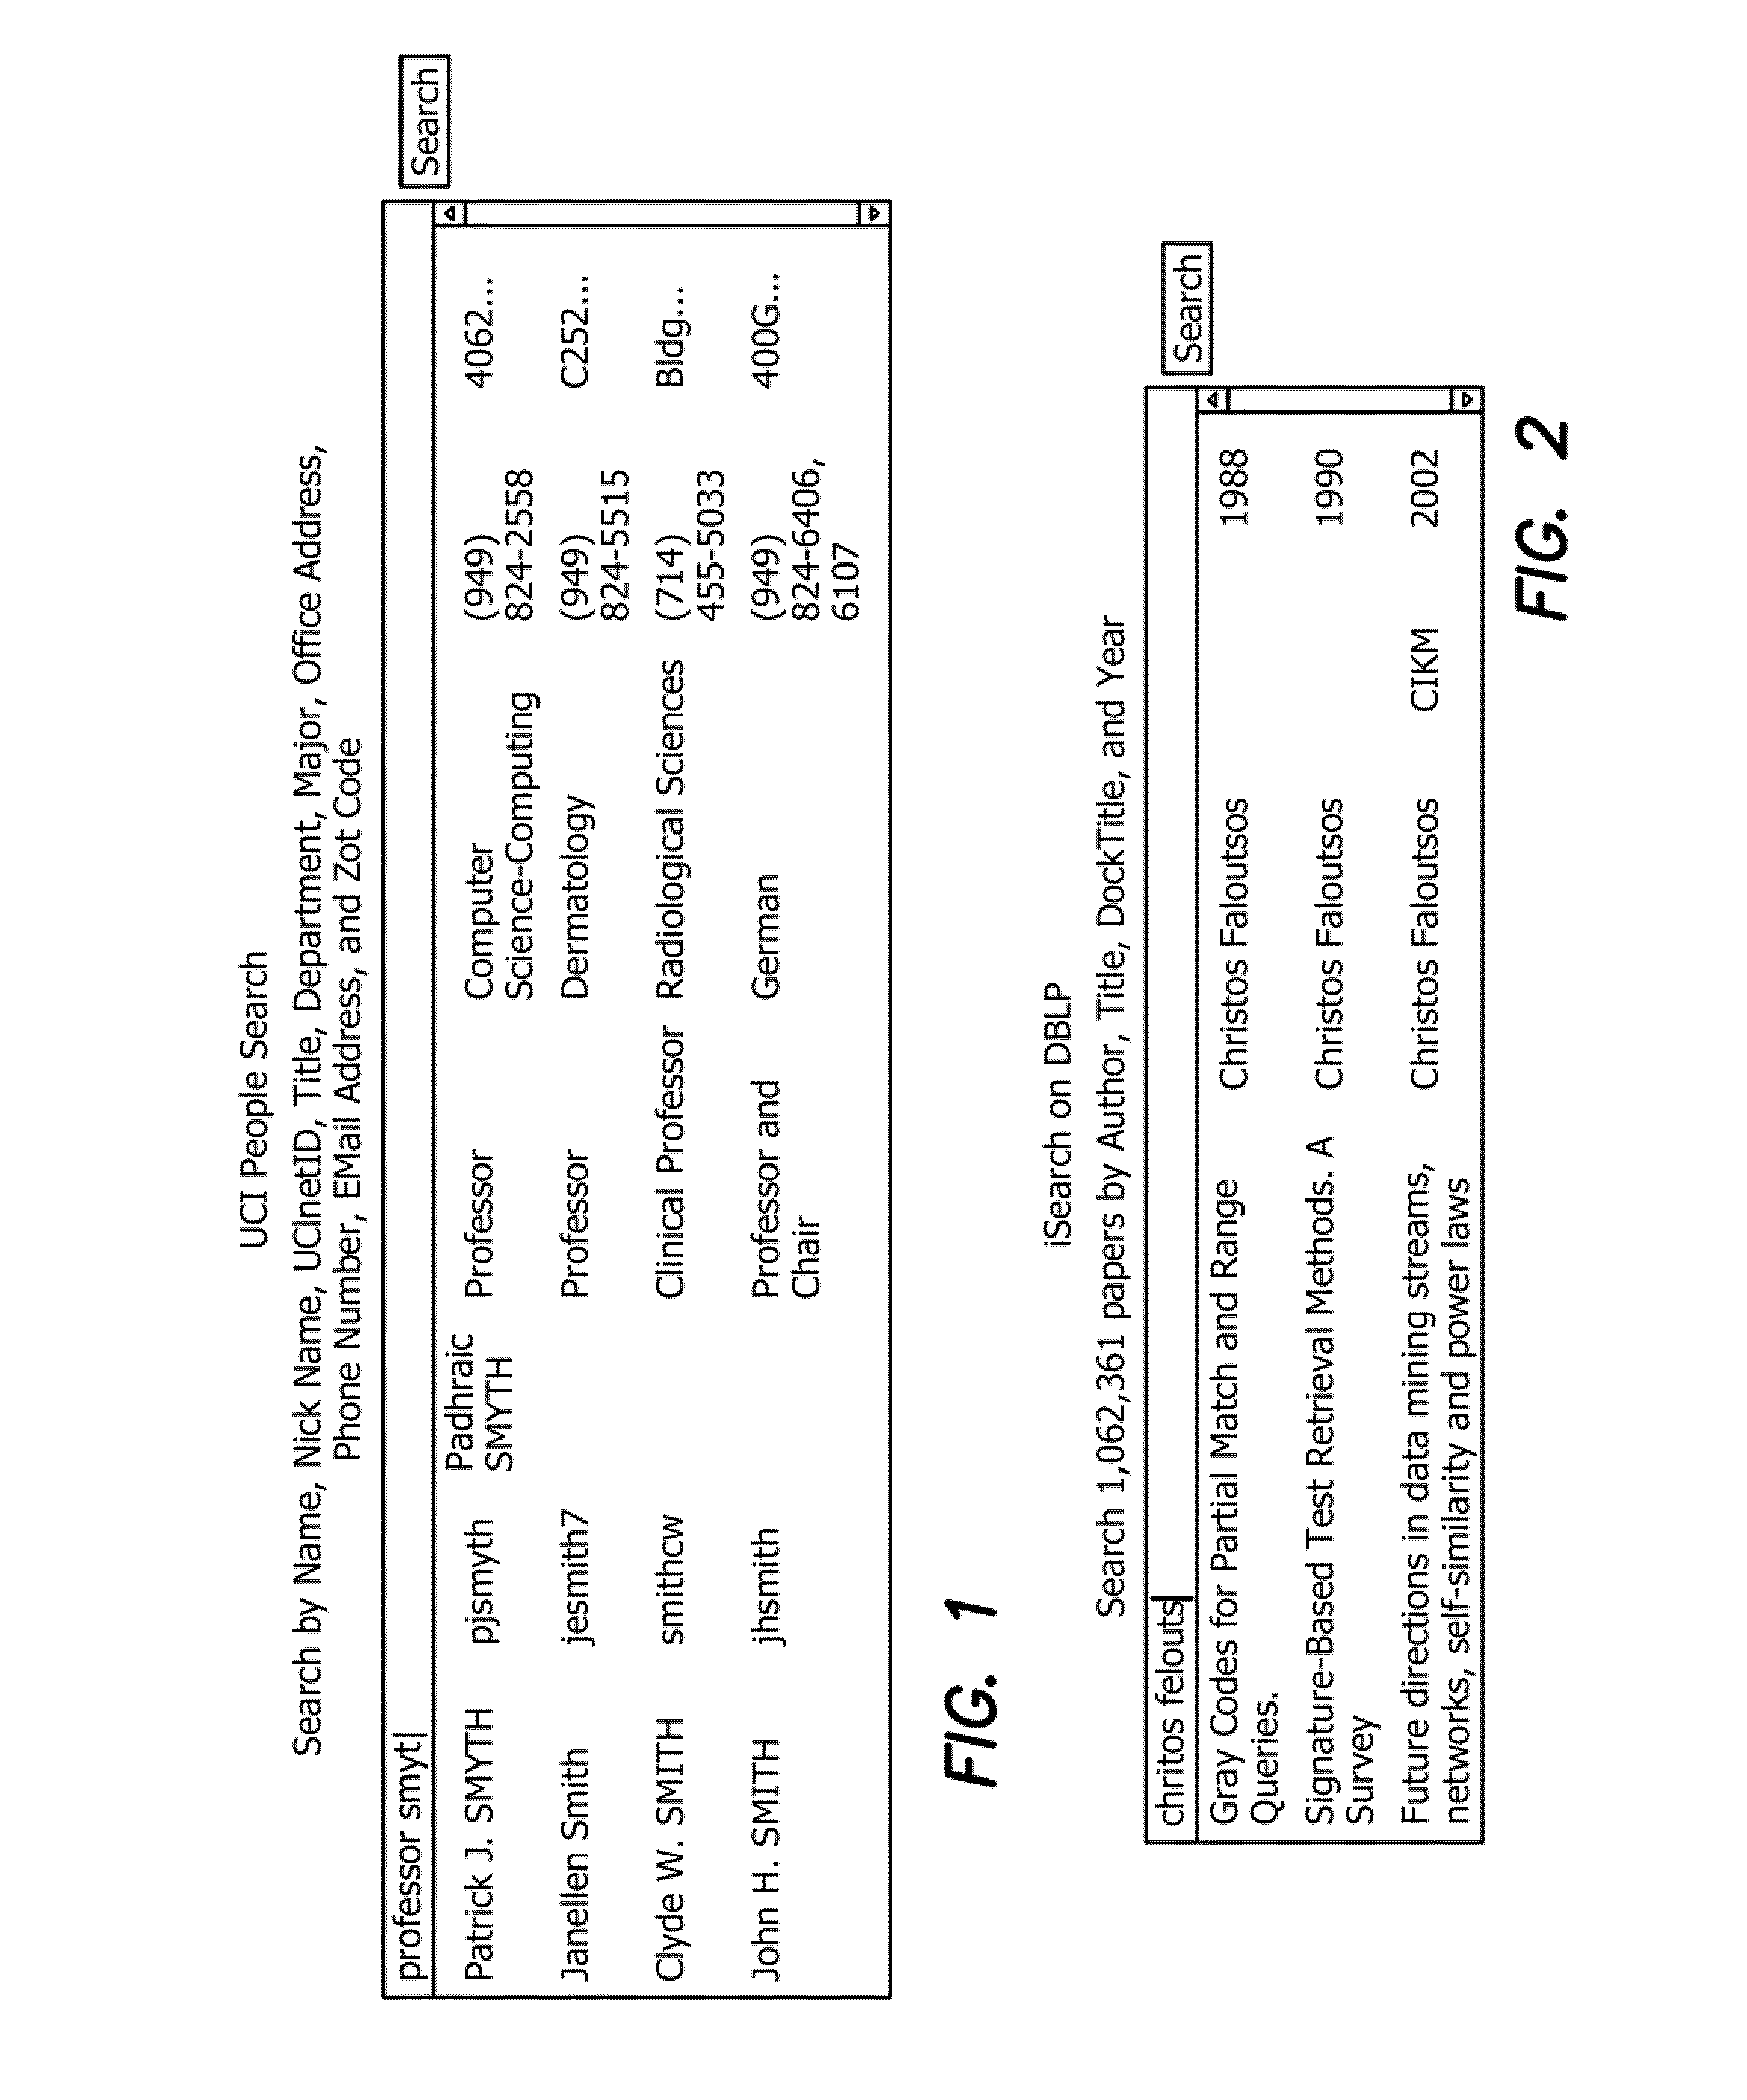 Method for efficiently supporting interactive, fuzzy search on structured data